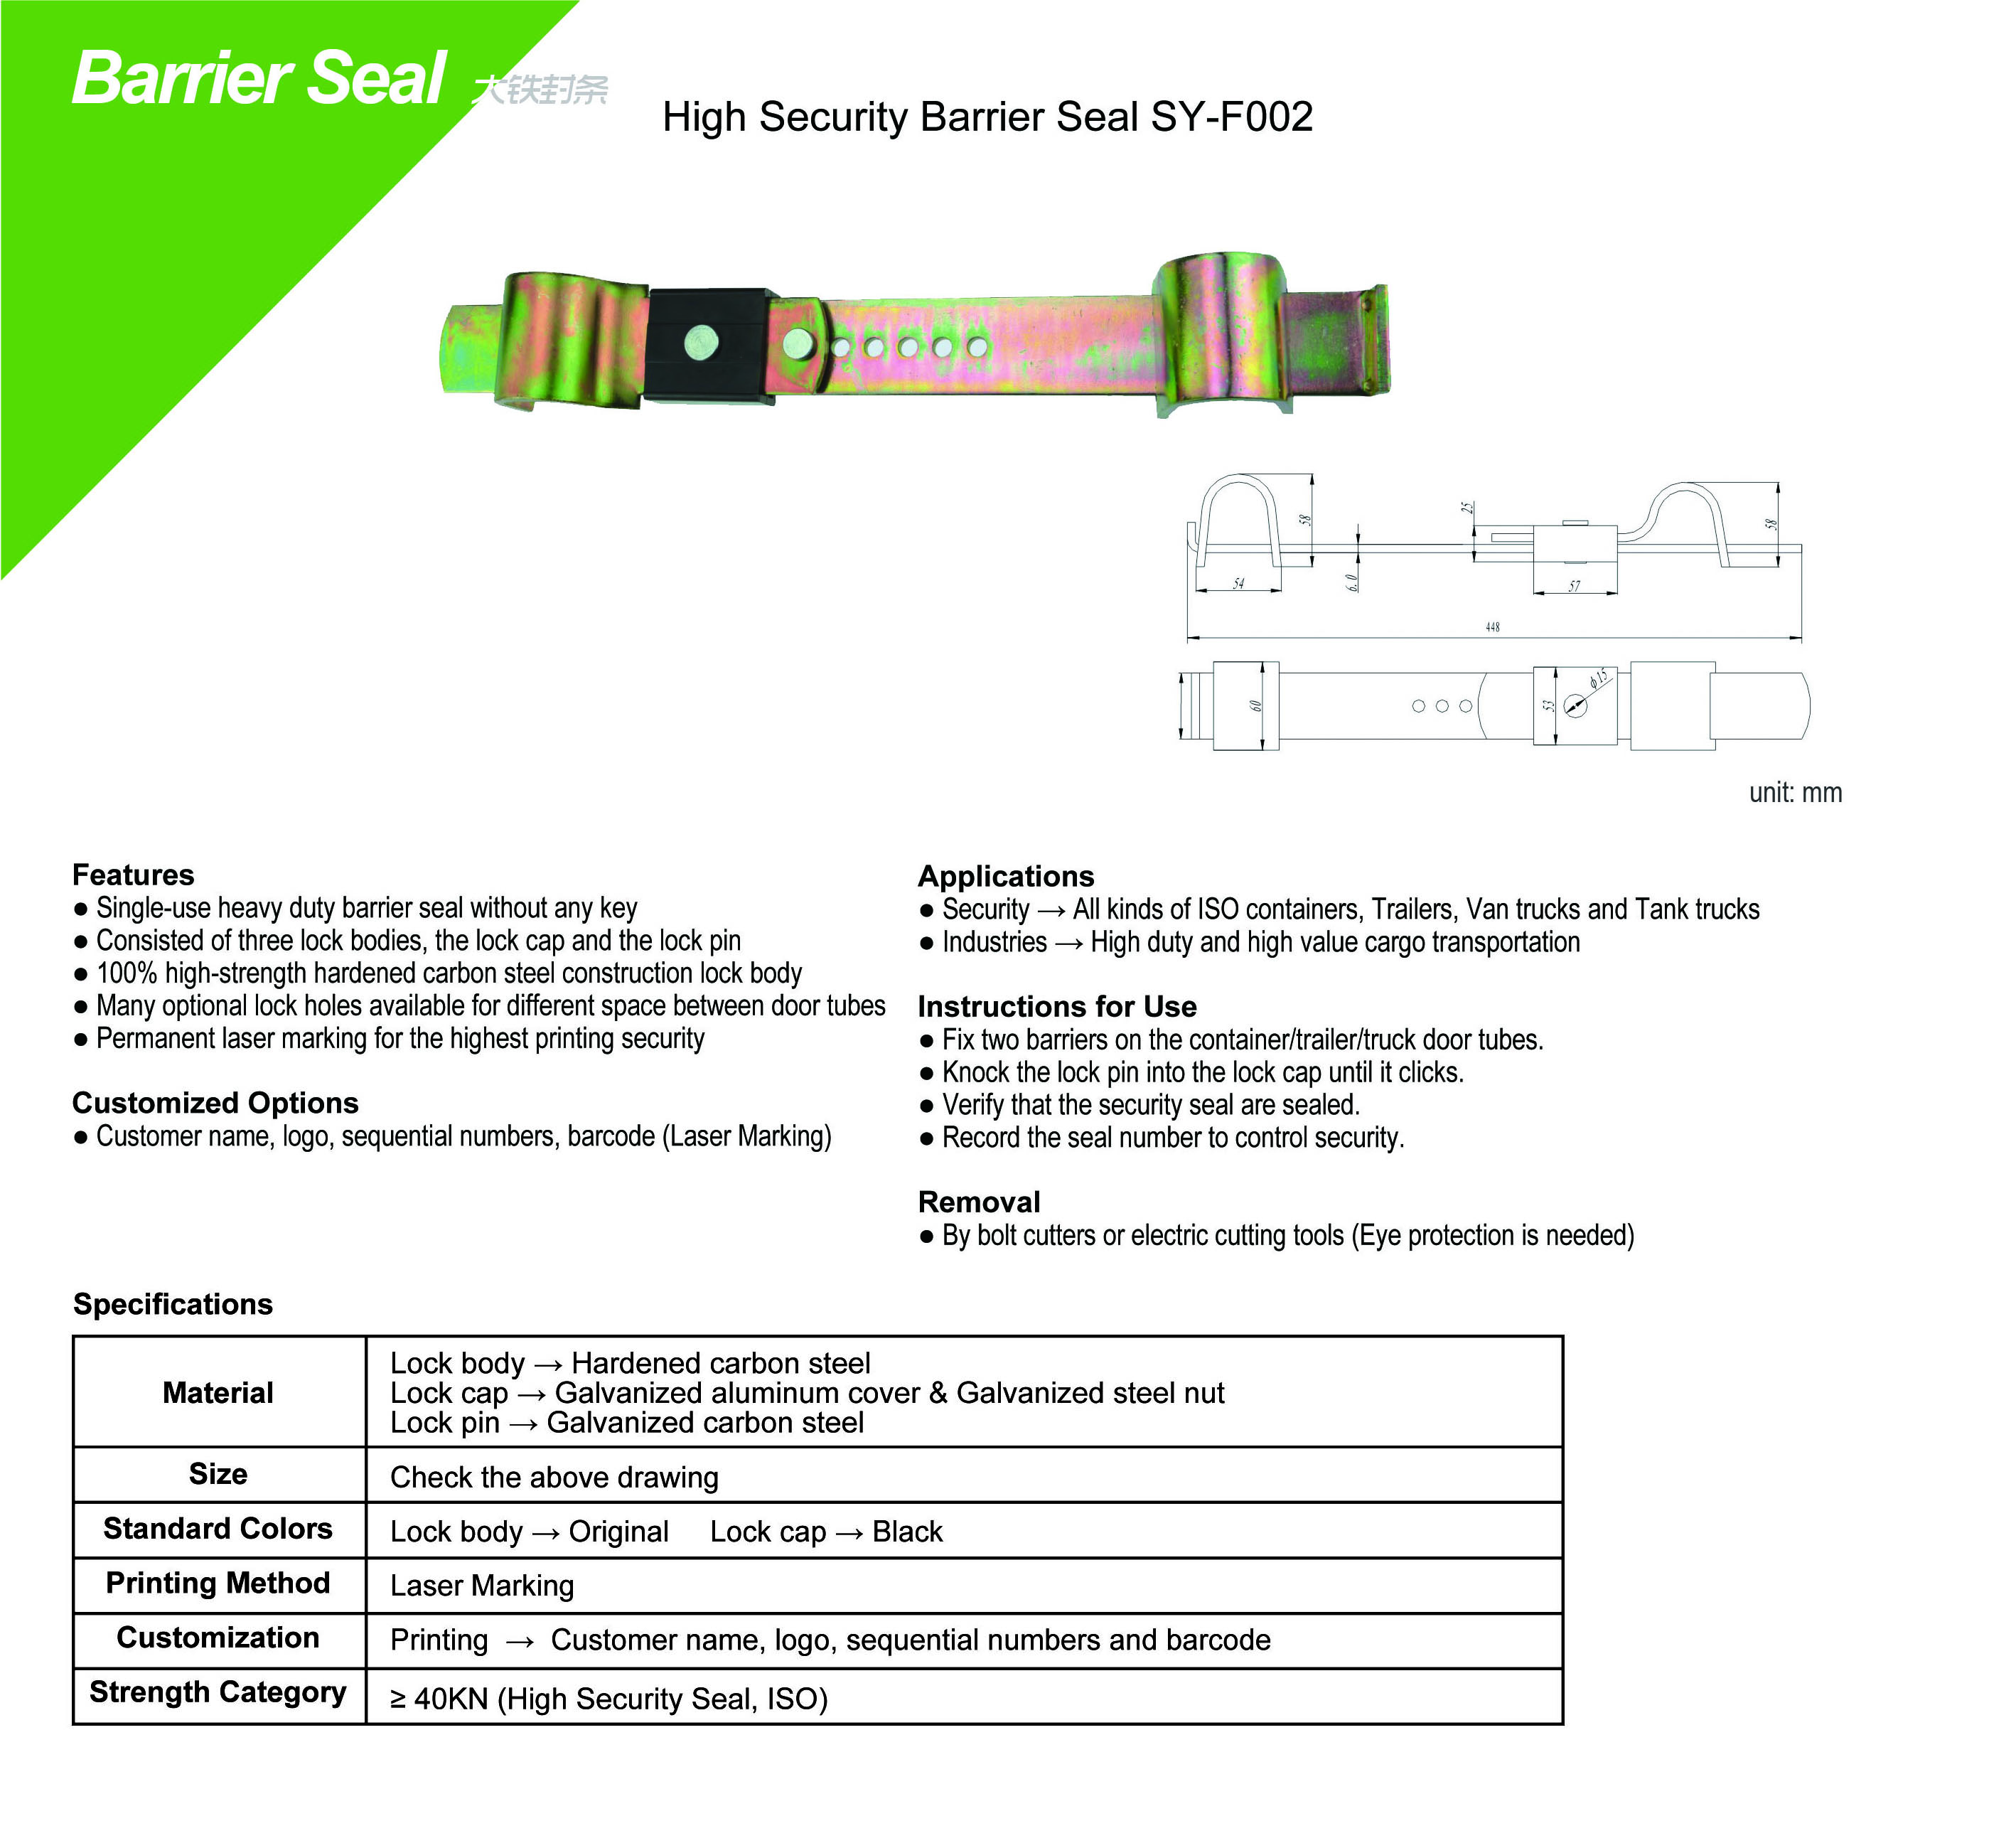 Bar seal for container loading high value cargo